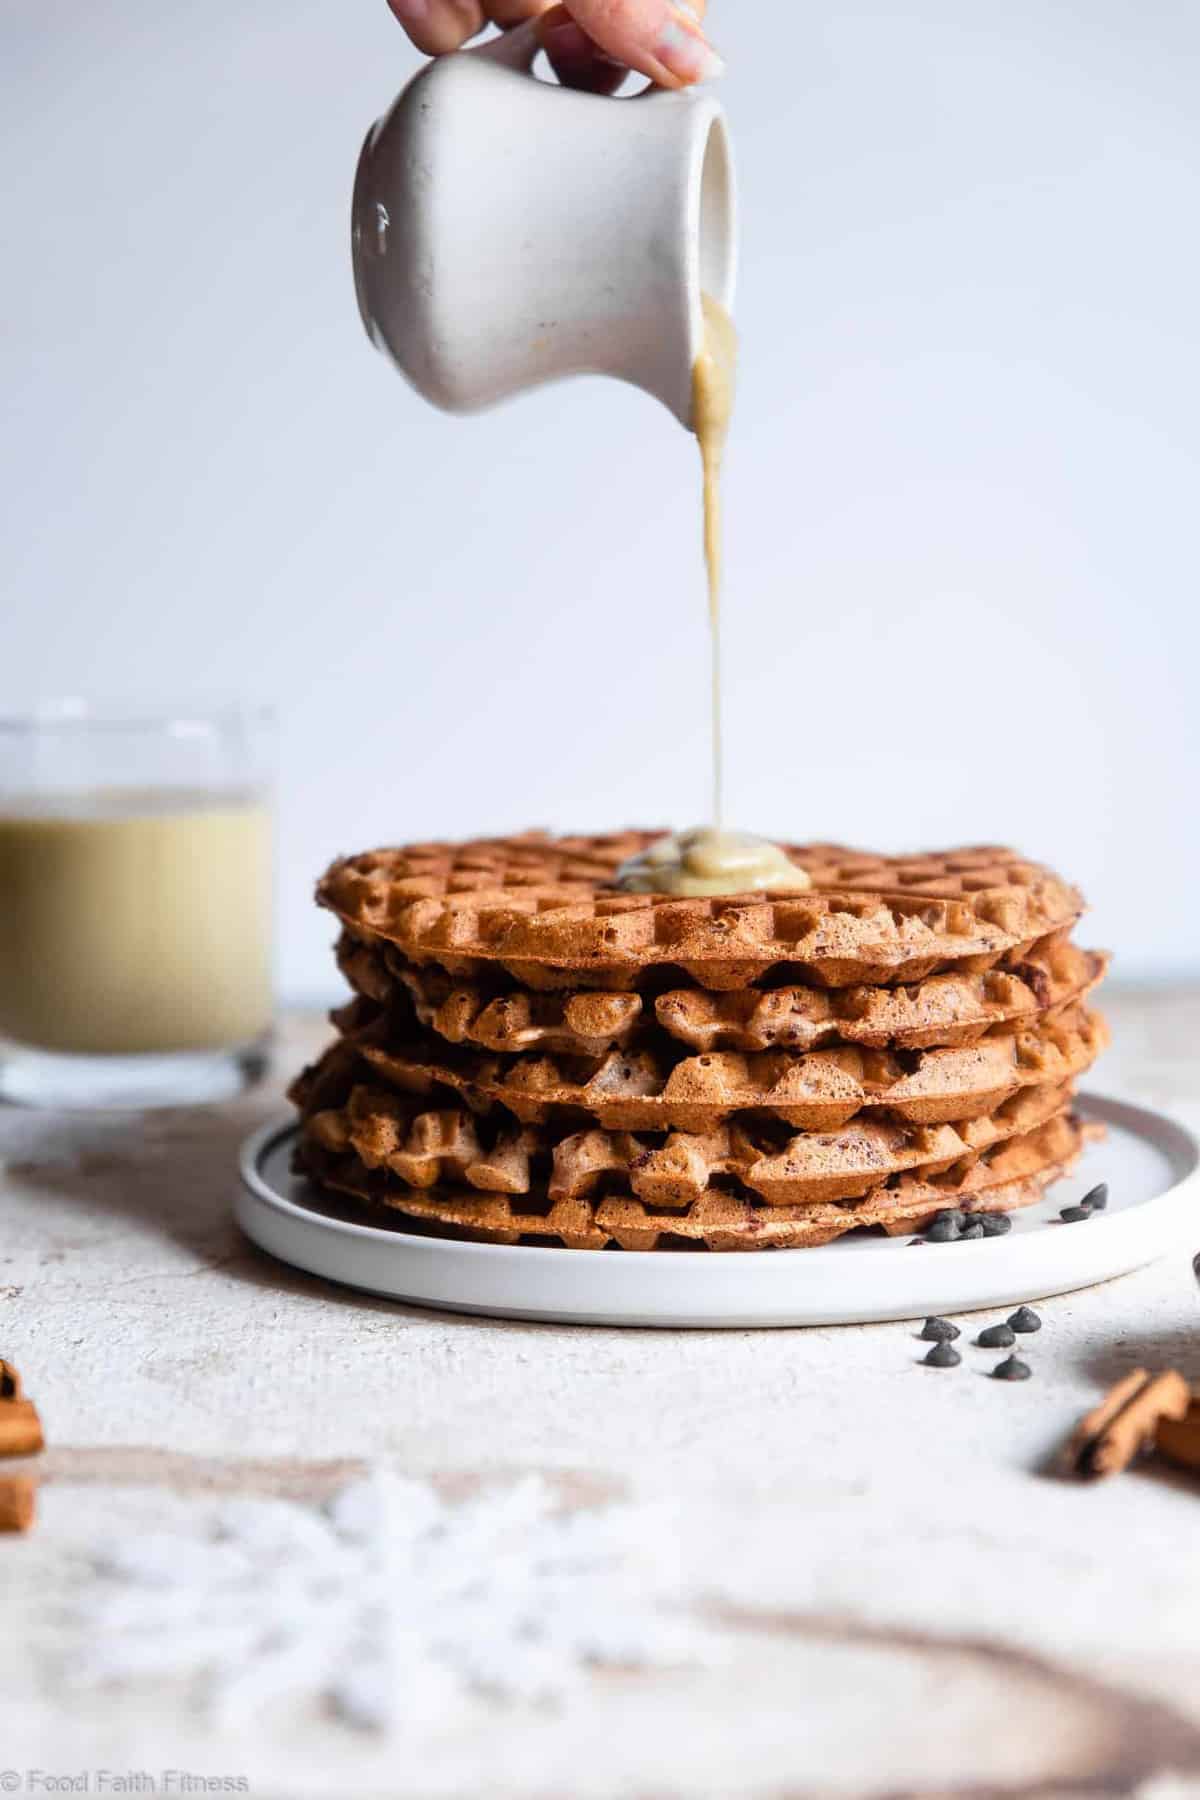 Gluten Free Vegan Waffles with Eggnog "Cream" Sauce - These FLUFFY vegan waffles are studded with chocolate chips and covered with a healthy eggnog "cream" sauce! A delicious holiday breakfast that you can make ahead for easy mornings! | #Foodfaithfitness | 